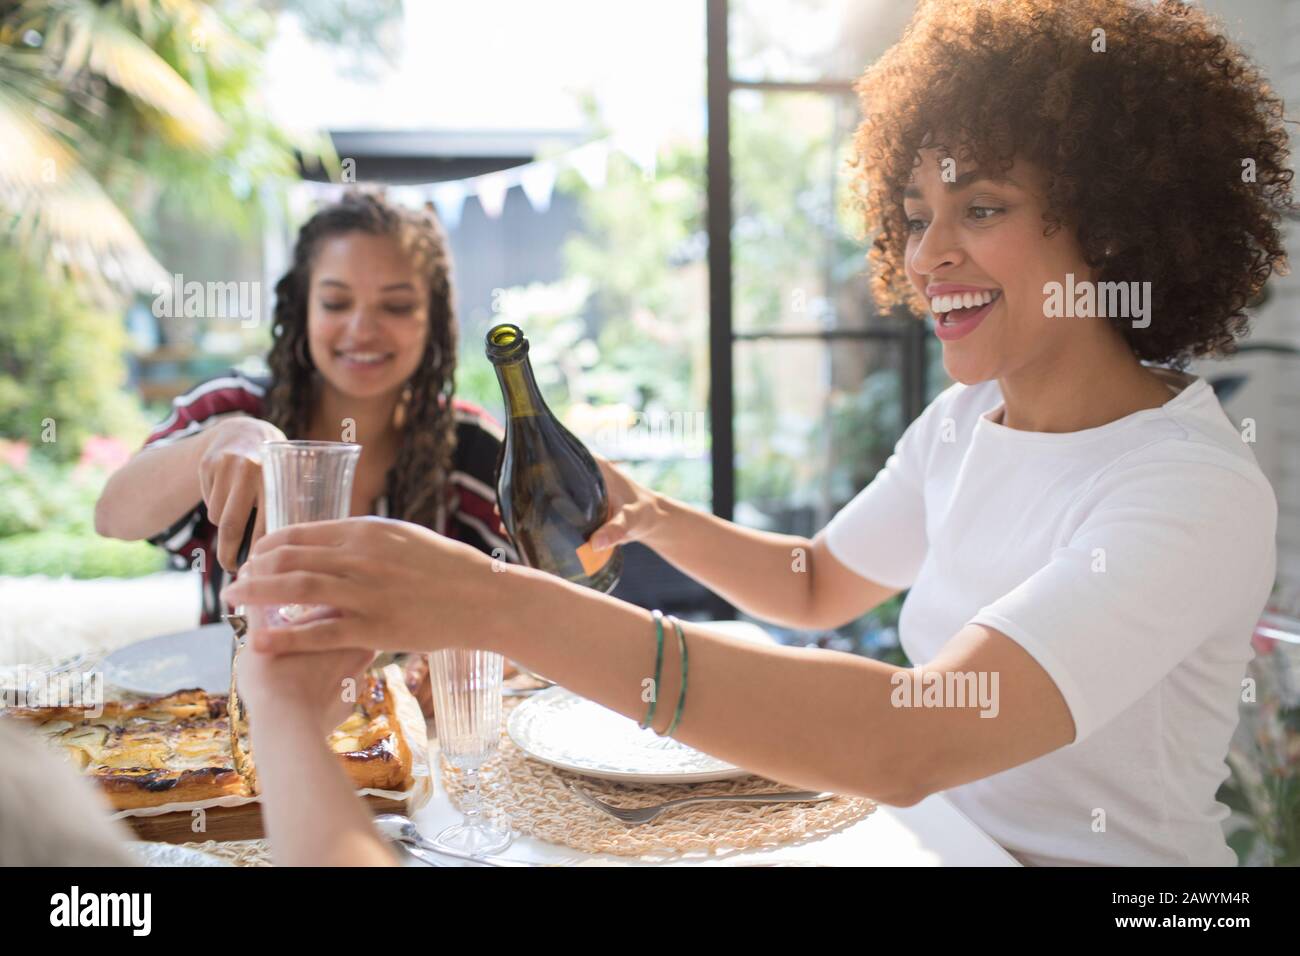 Happy young woman pouring wine for friend at table Stock Photo